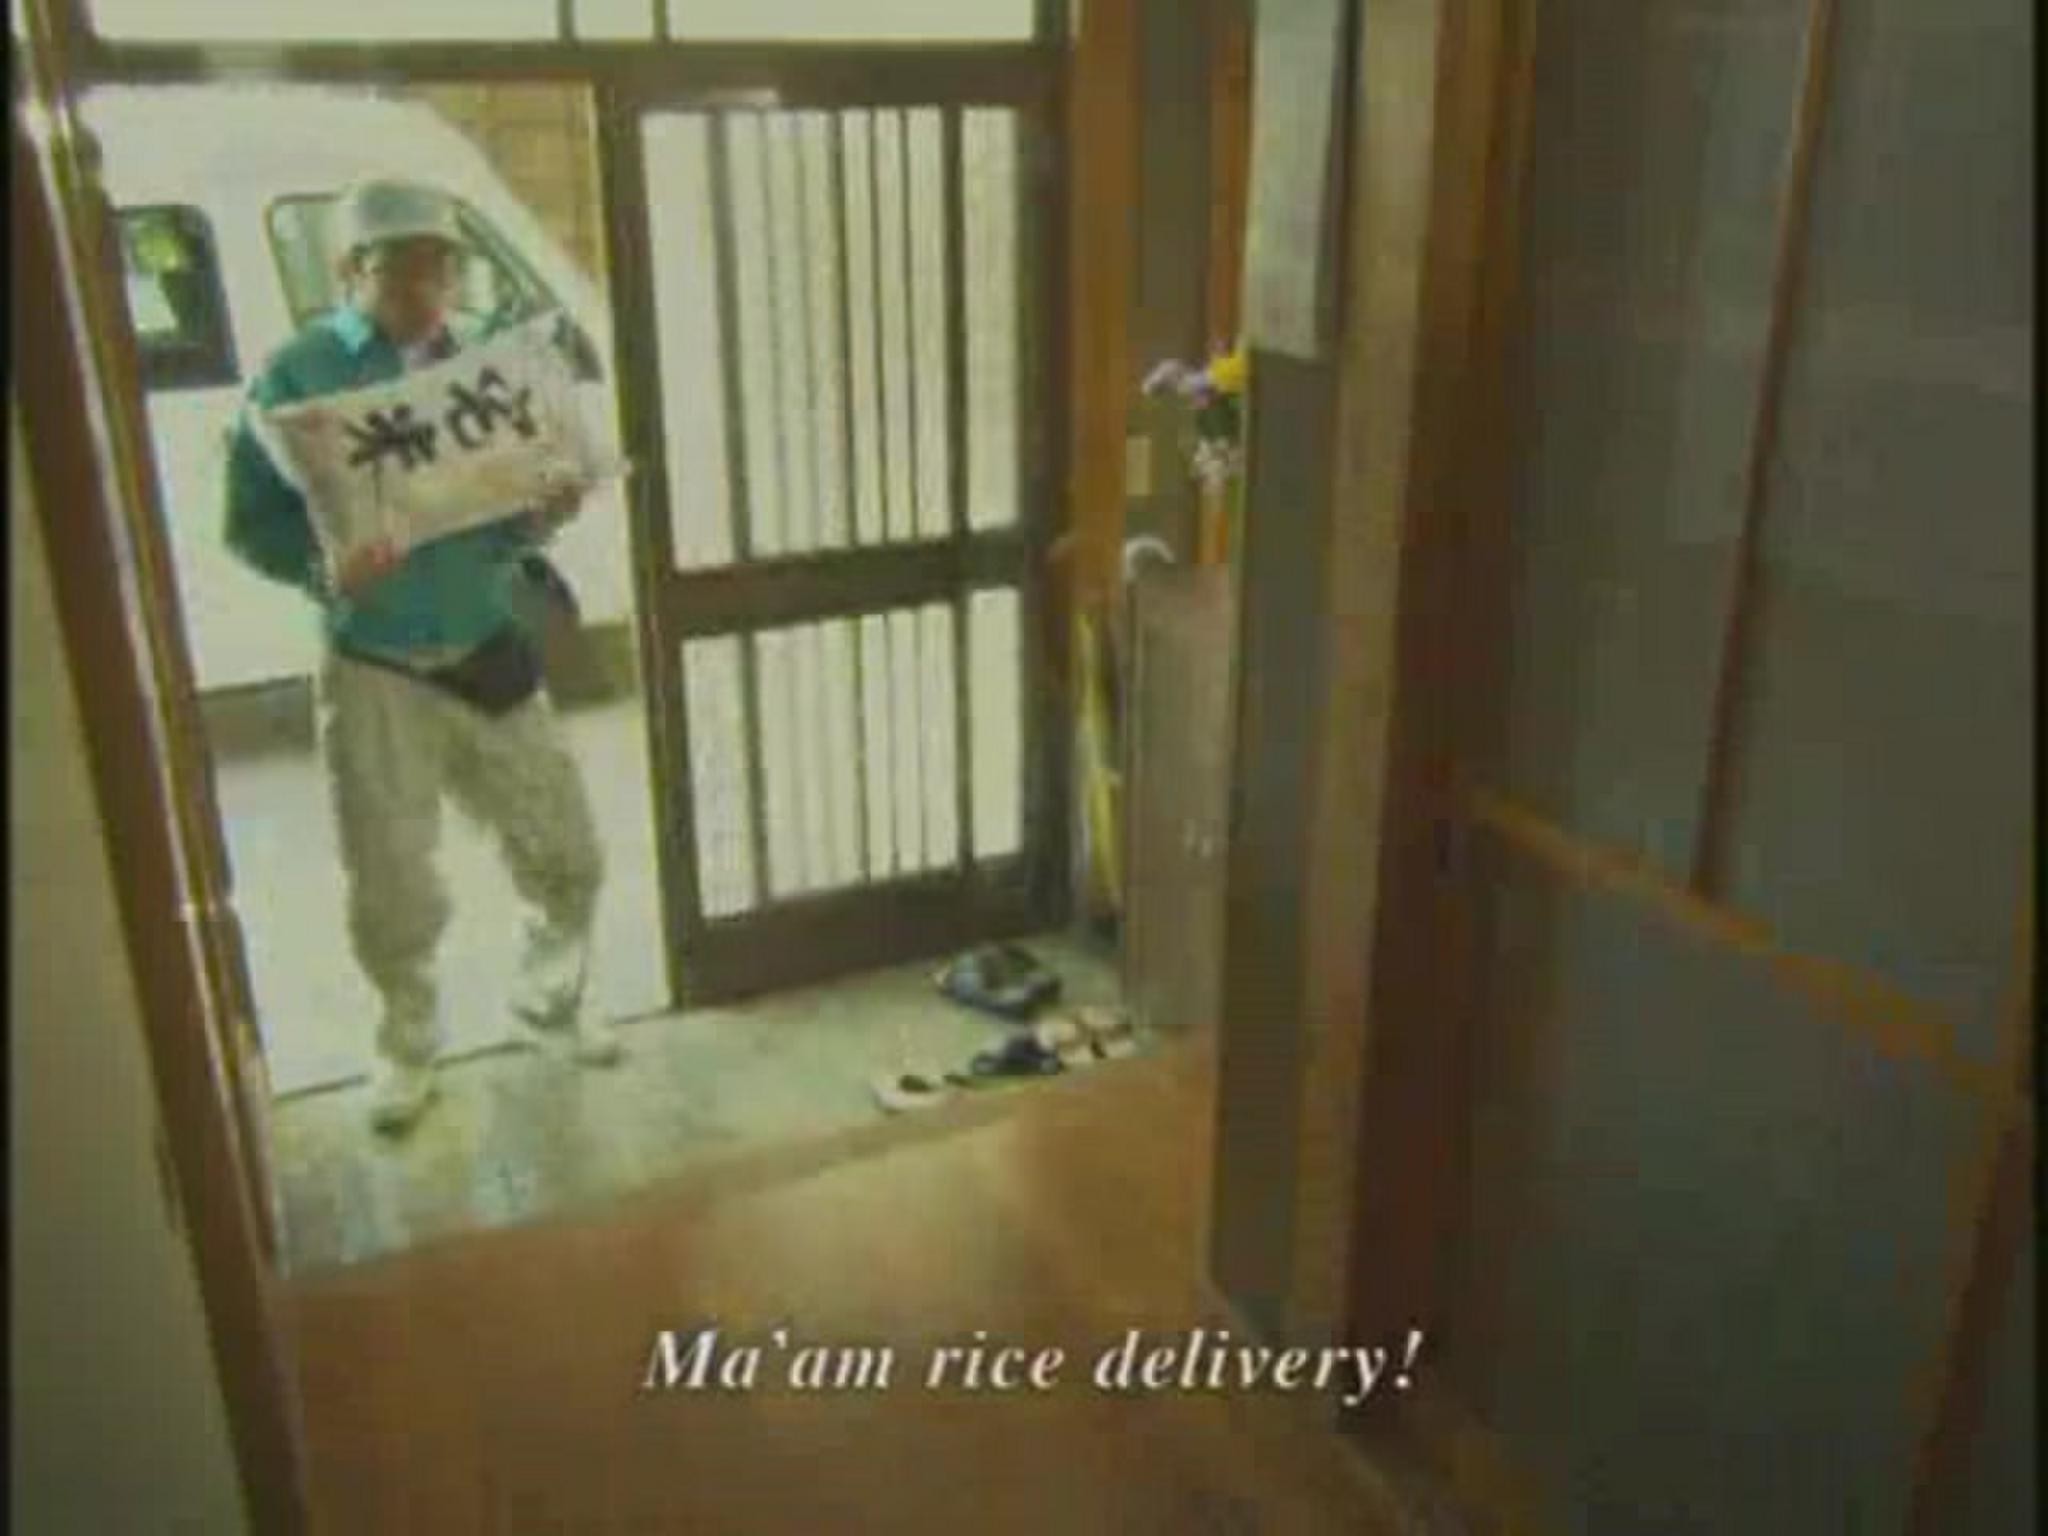 RICE DELIVERY SERVICE